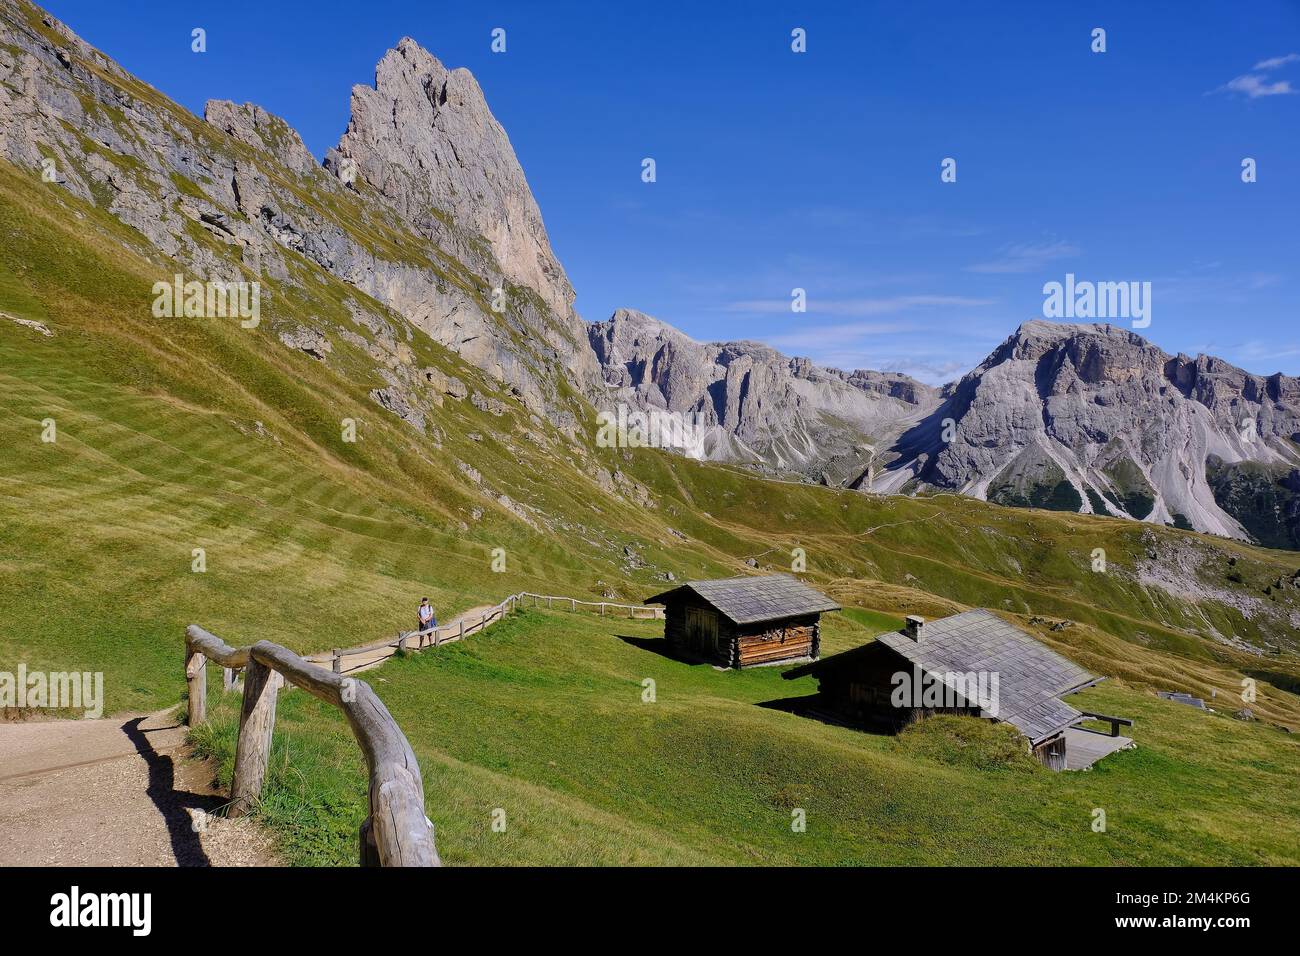 Single walker on path at Geislerspitzen massif on Seceda with grass, huts and view to Odle mountains, Val (Valley) Gardena, Dolomites, Italy Stock Photo